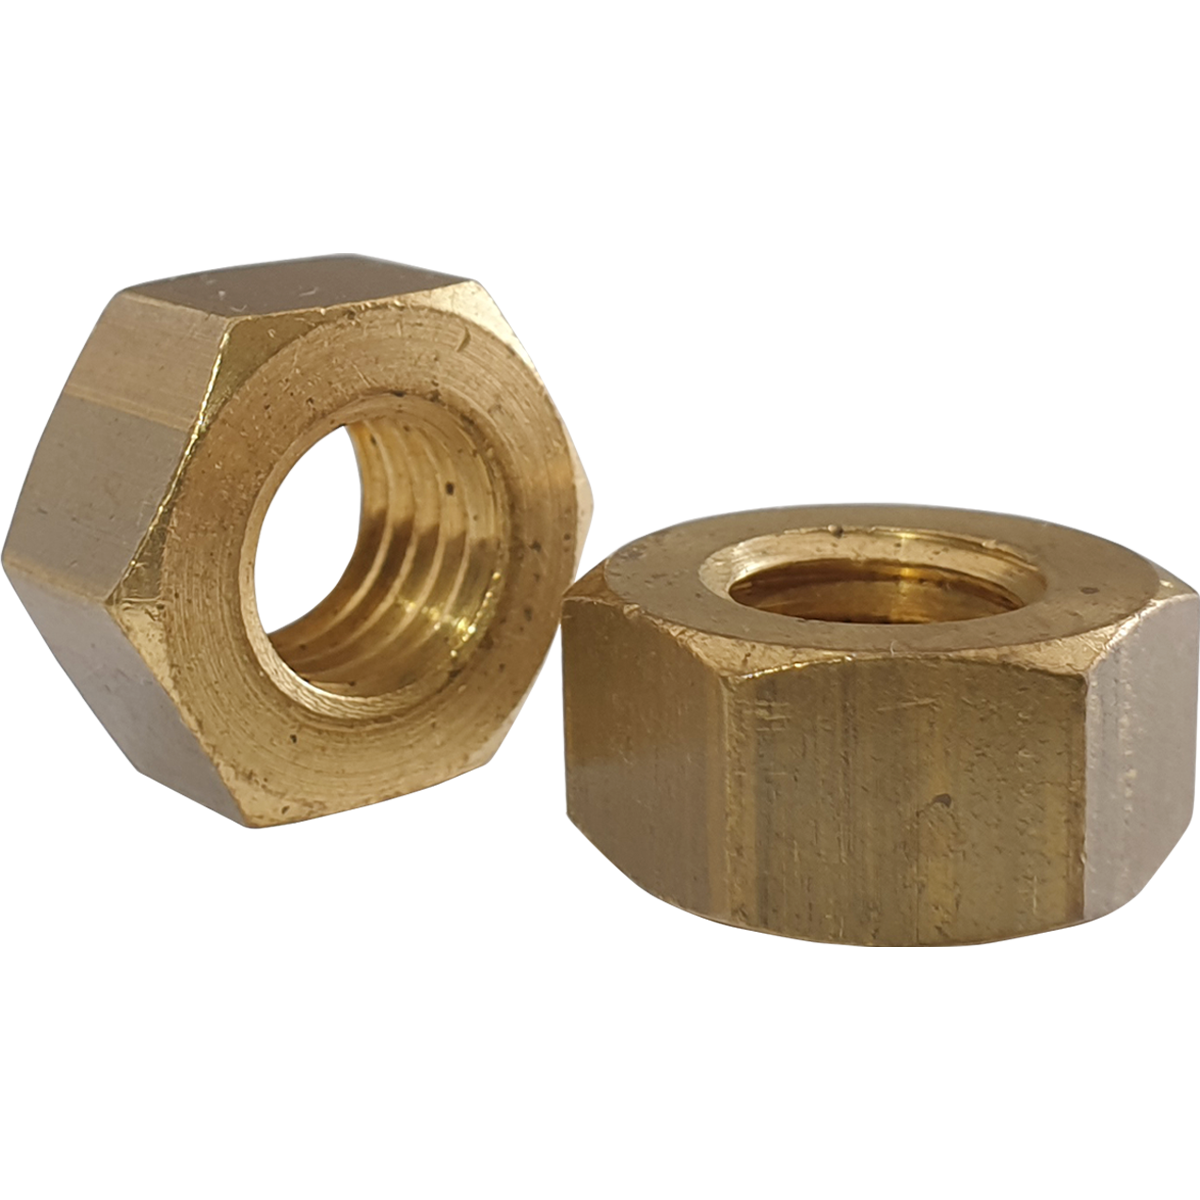 Brass hex full nuts, also known as hex nuts or hexagonal nuts in various sizes and at great prices